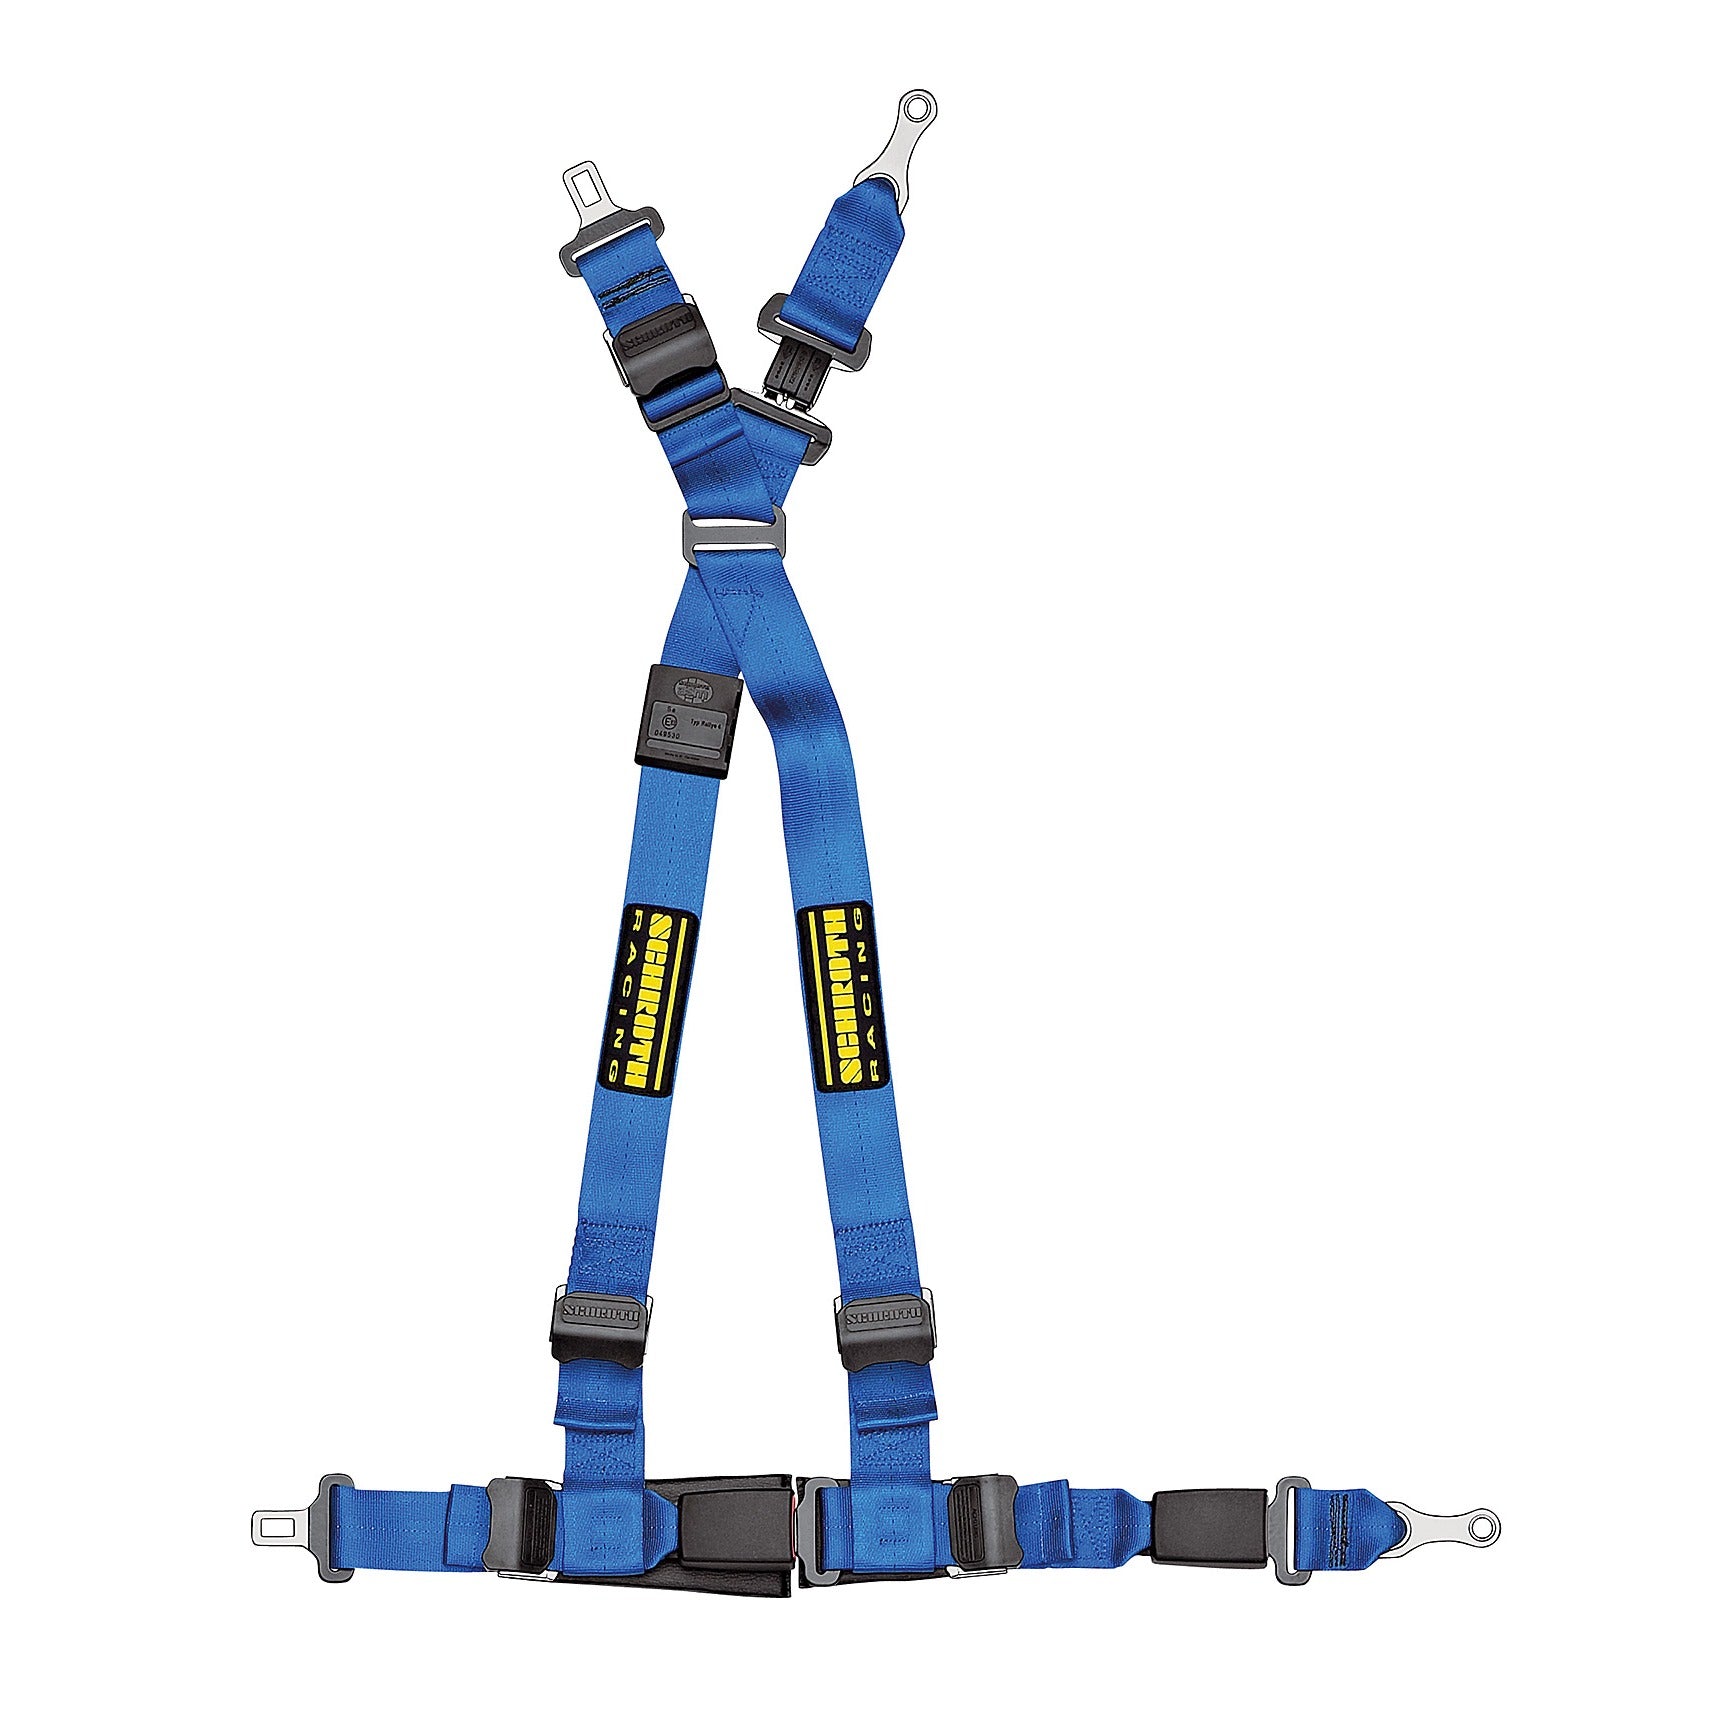 Schroth - Ford Mustang 2005-2017 - Schroth QuickFit Harness Left Side - Blue (2005-2017 Mustangs ONLY)